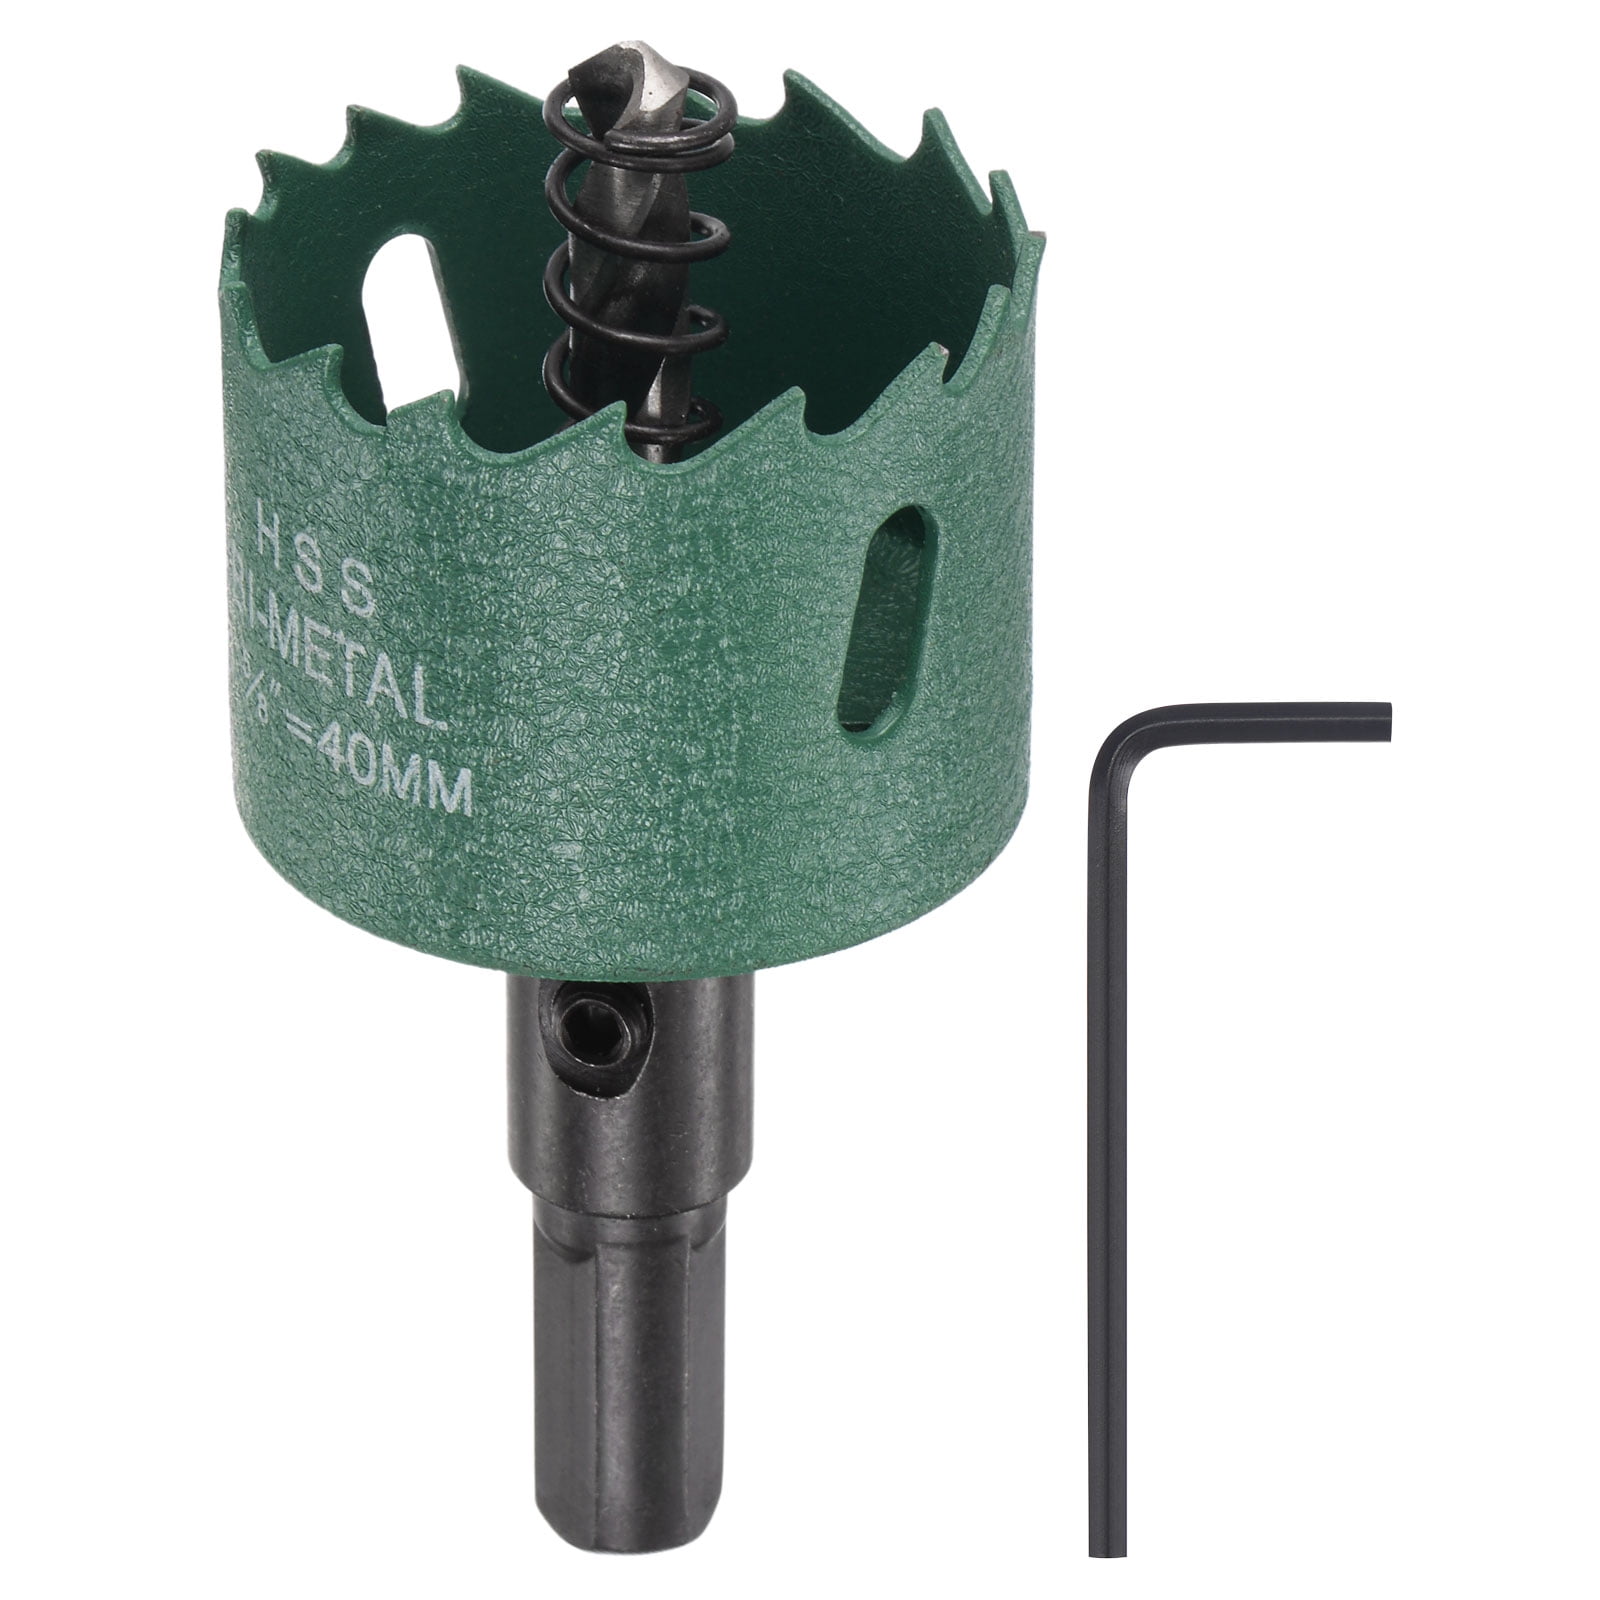 Hc2 Hole Cutter 5/16 By Kemper Tools